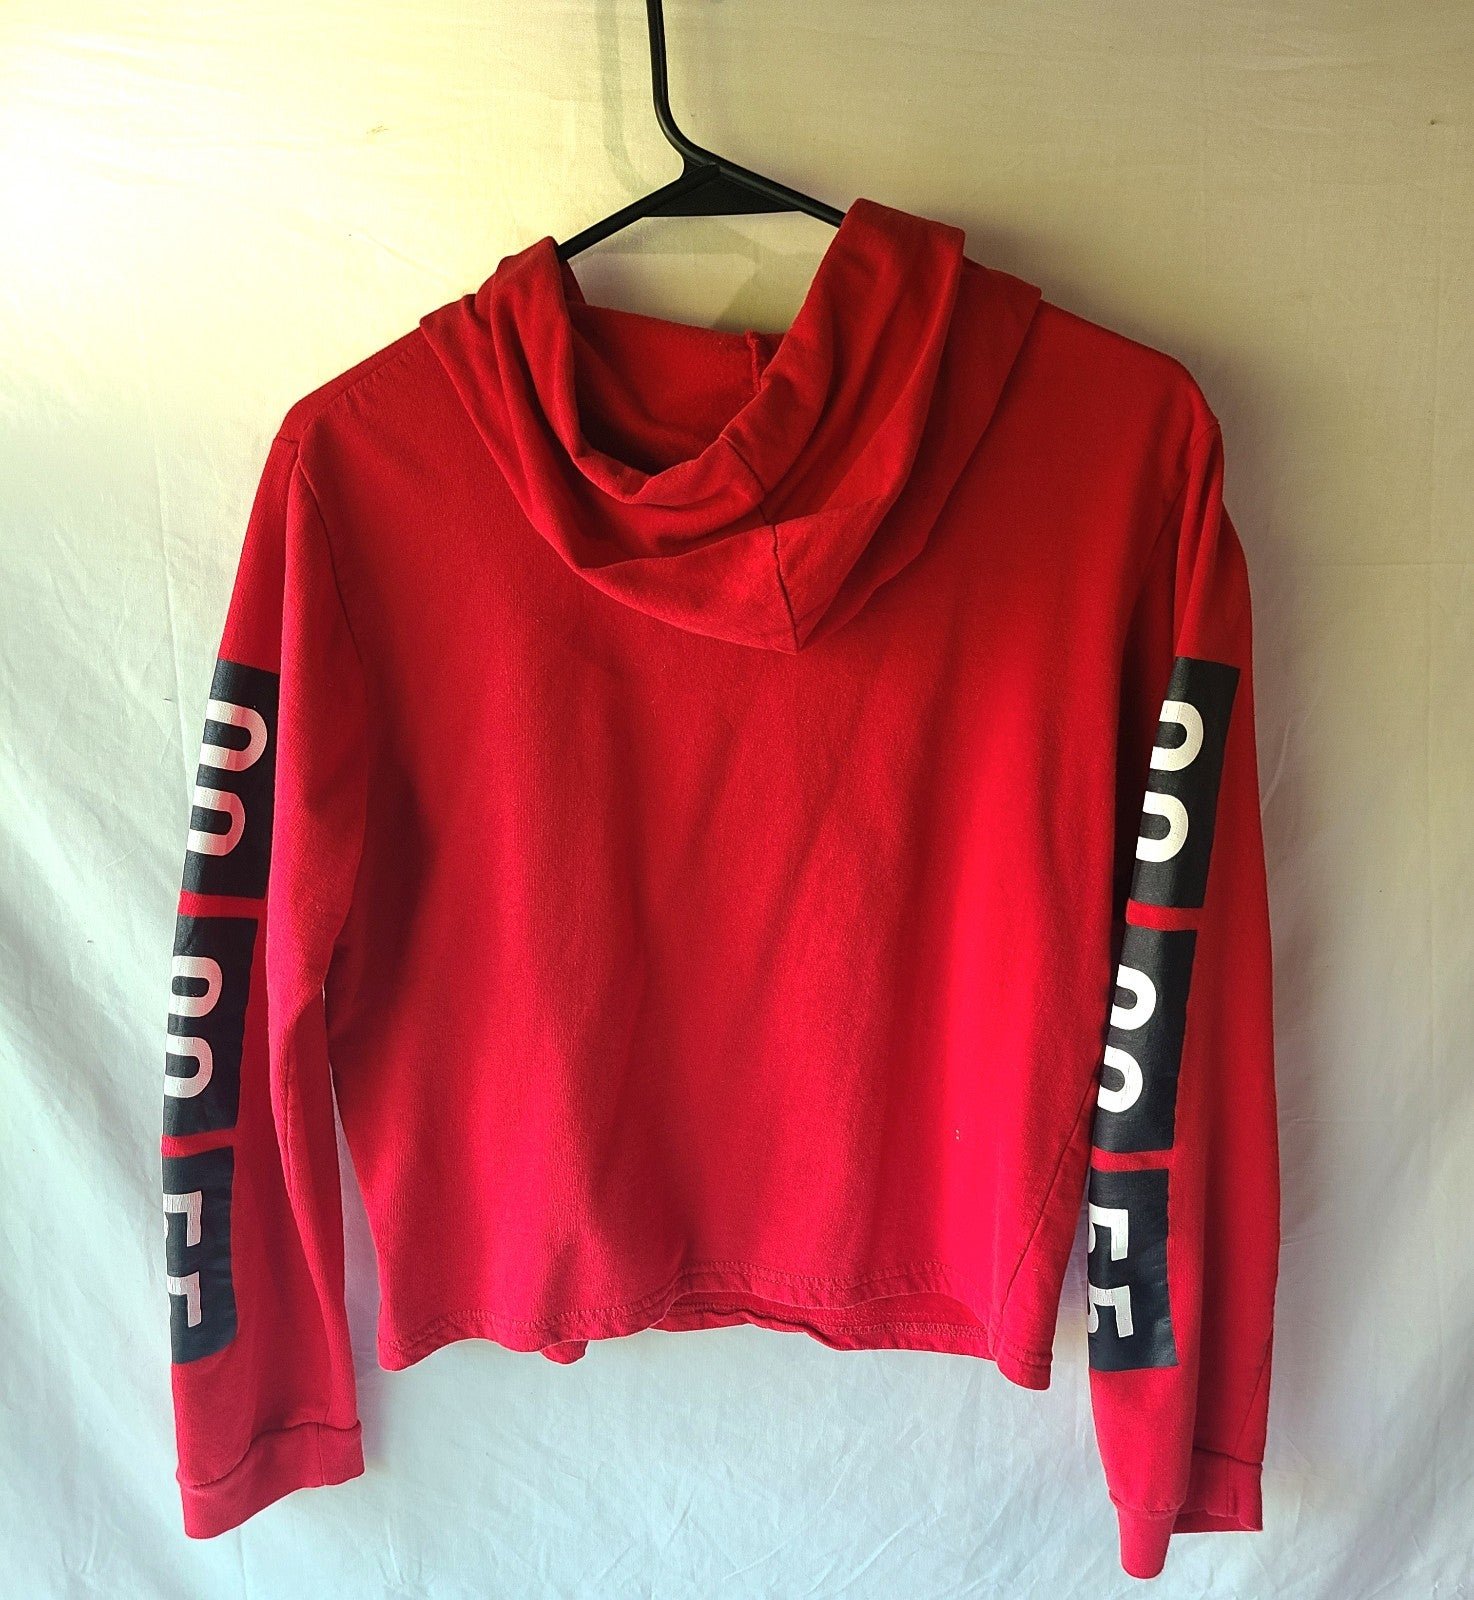 Wholesale price Red cropped hoodie piXL6I89J Great